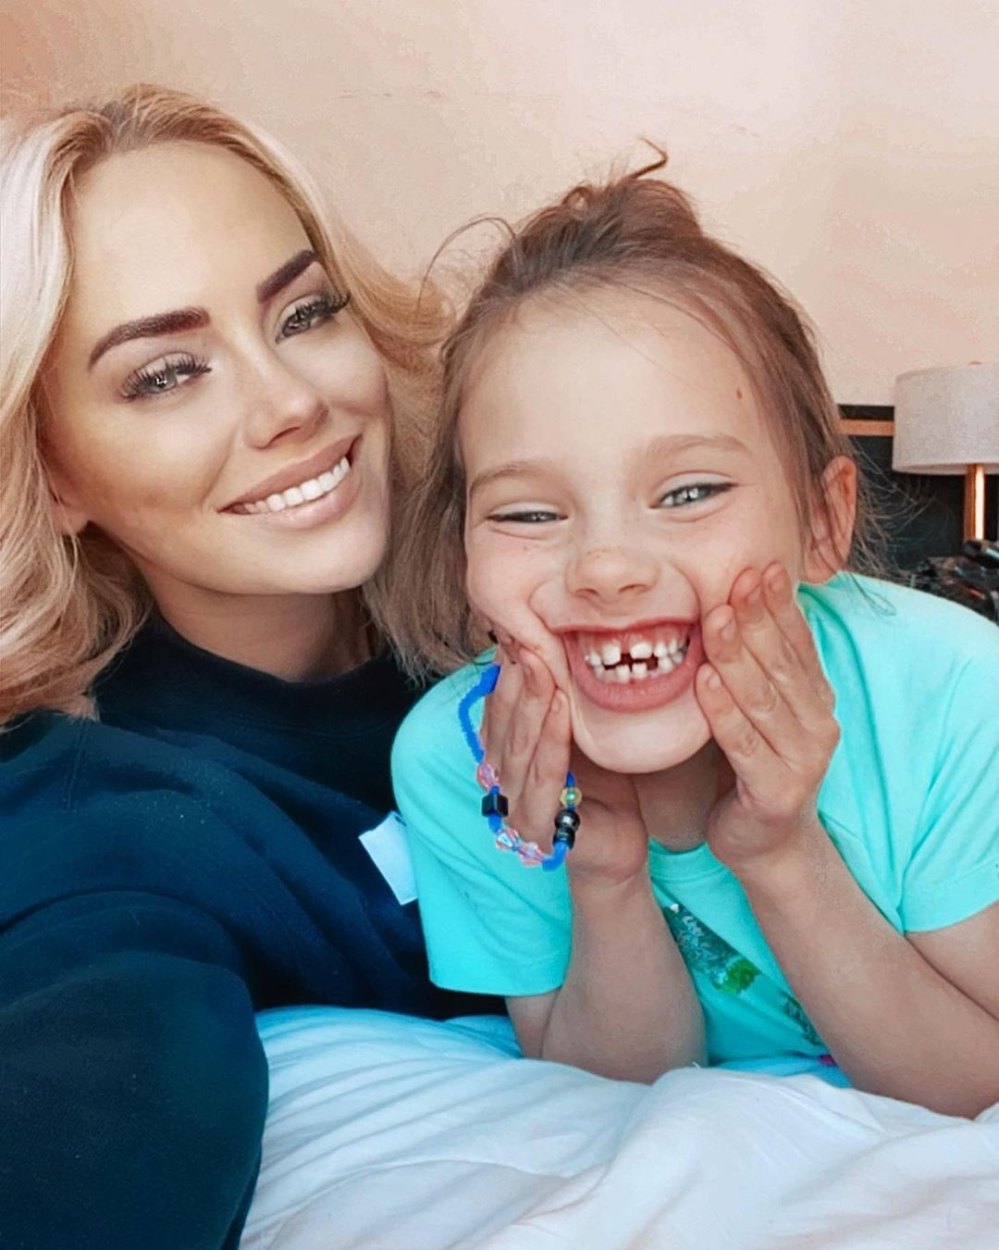 Southern Charm’s Kathryn Dennis Shares Selfie With Daughter After Temporary Custody Loss